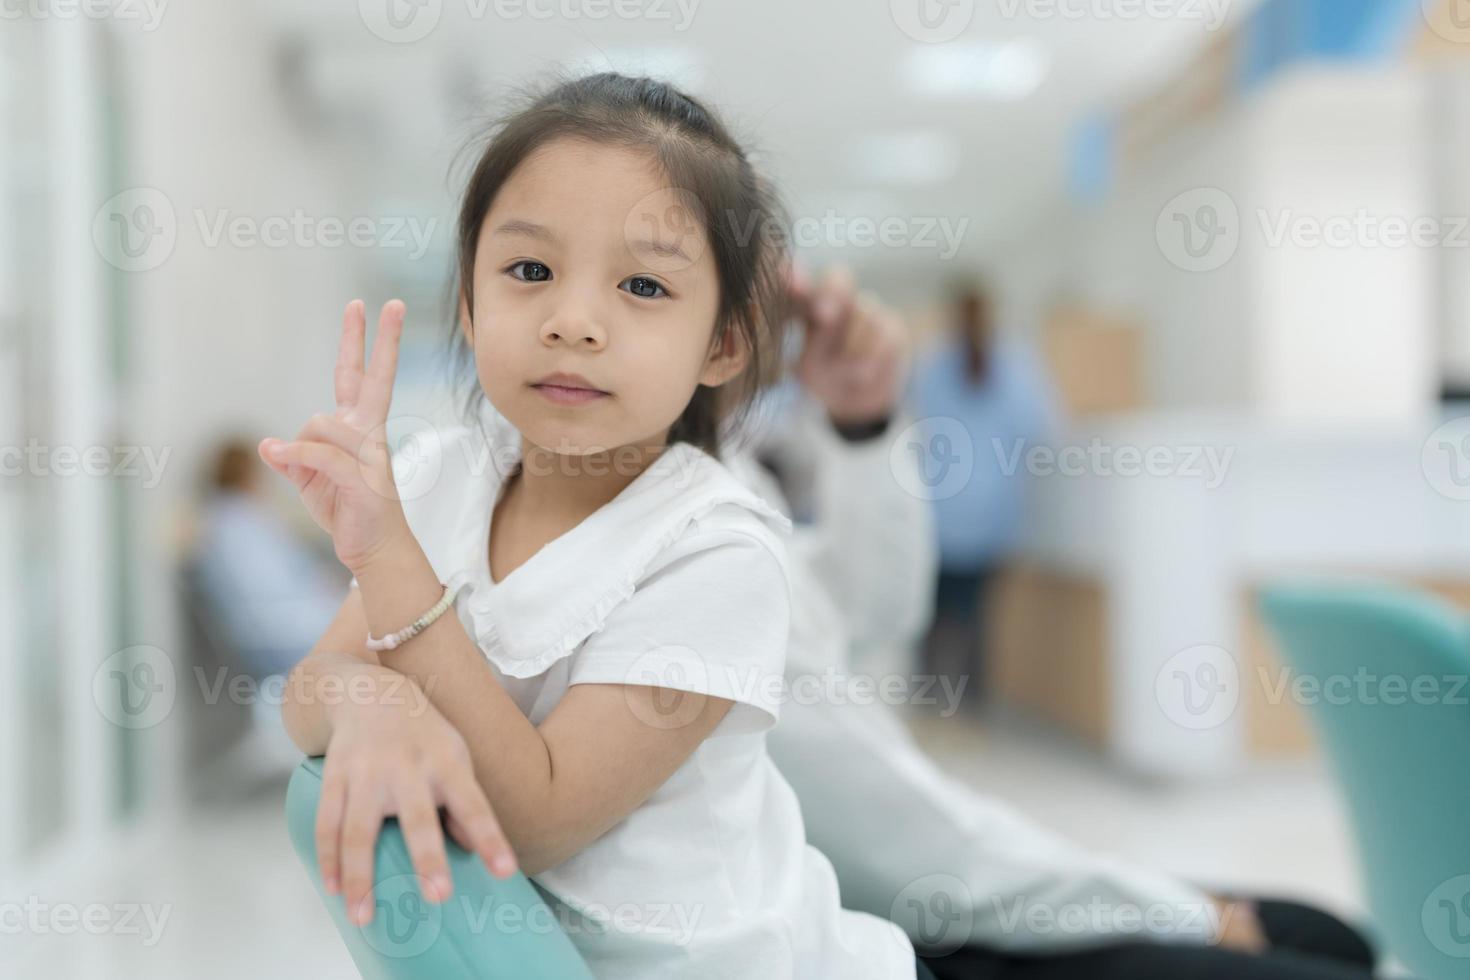 Girl sitting smiling in the hospital lobby. photo